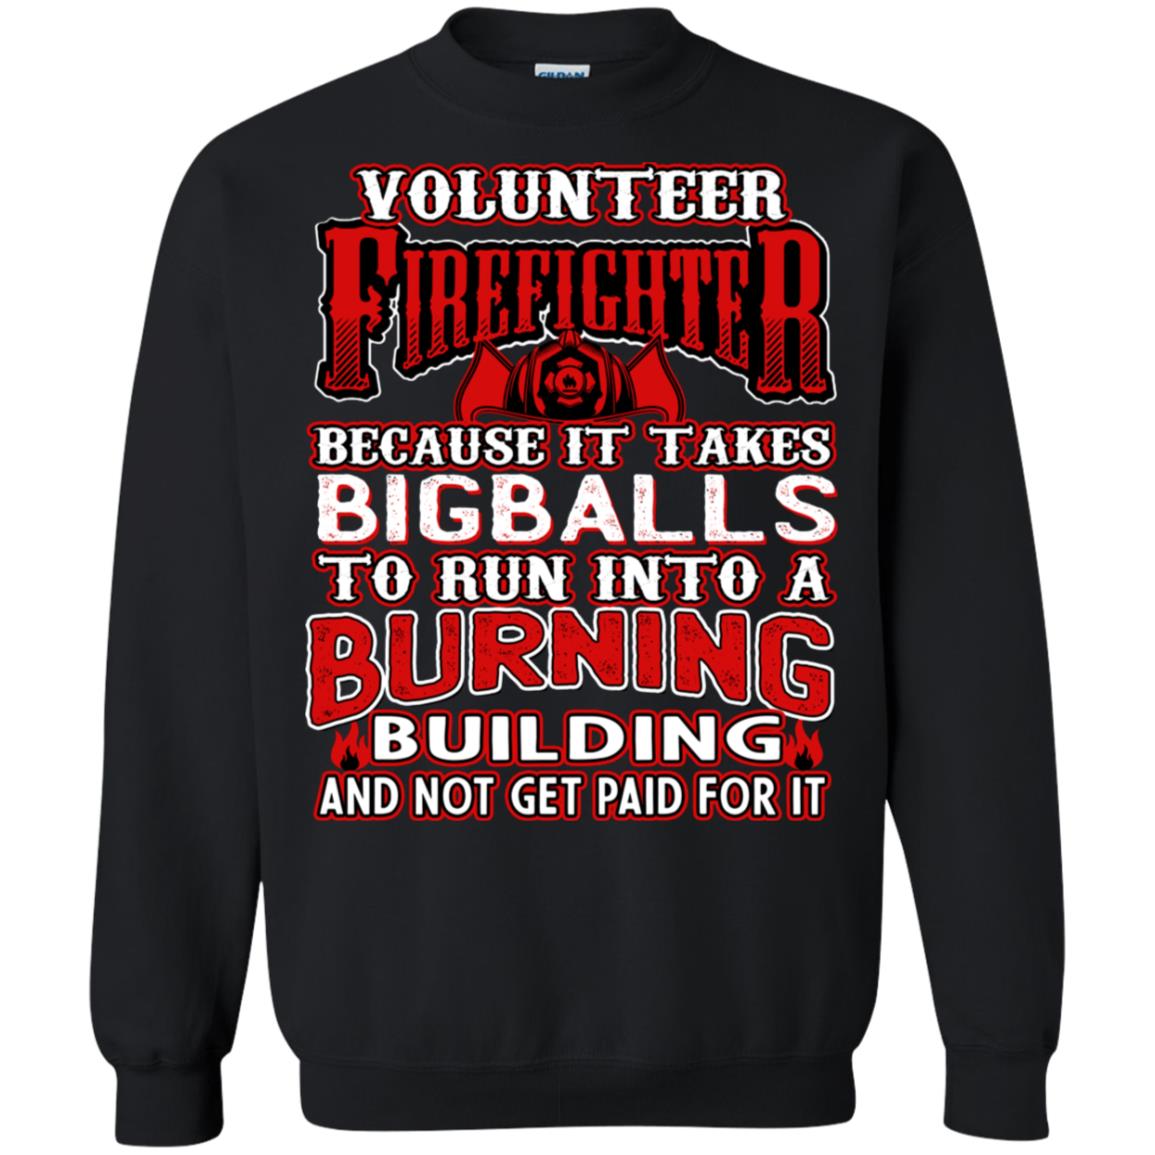 Voluteer Firefighter Because It Takes Bigballs To Run Into A Burning  Building And Not Get Paid For ItG180 Gildan Crewneck Pullover Sweatshirt 8 oz.